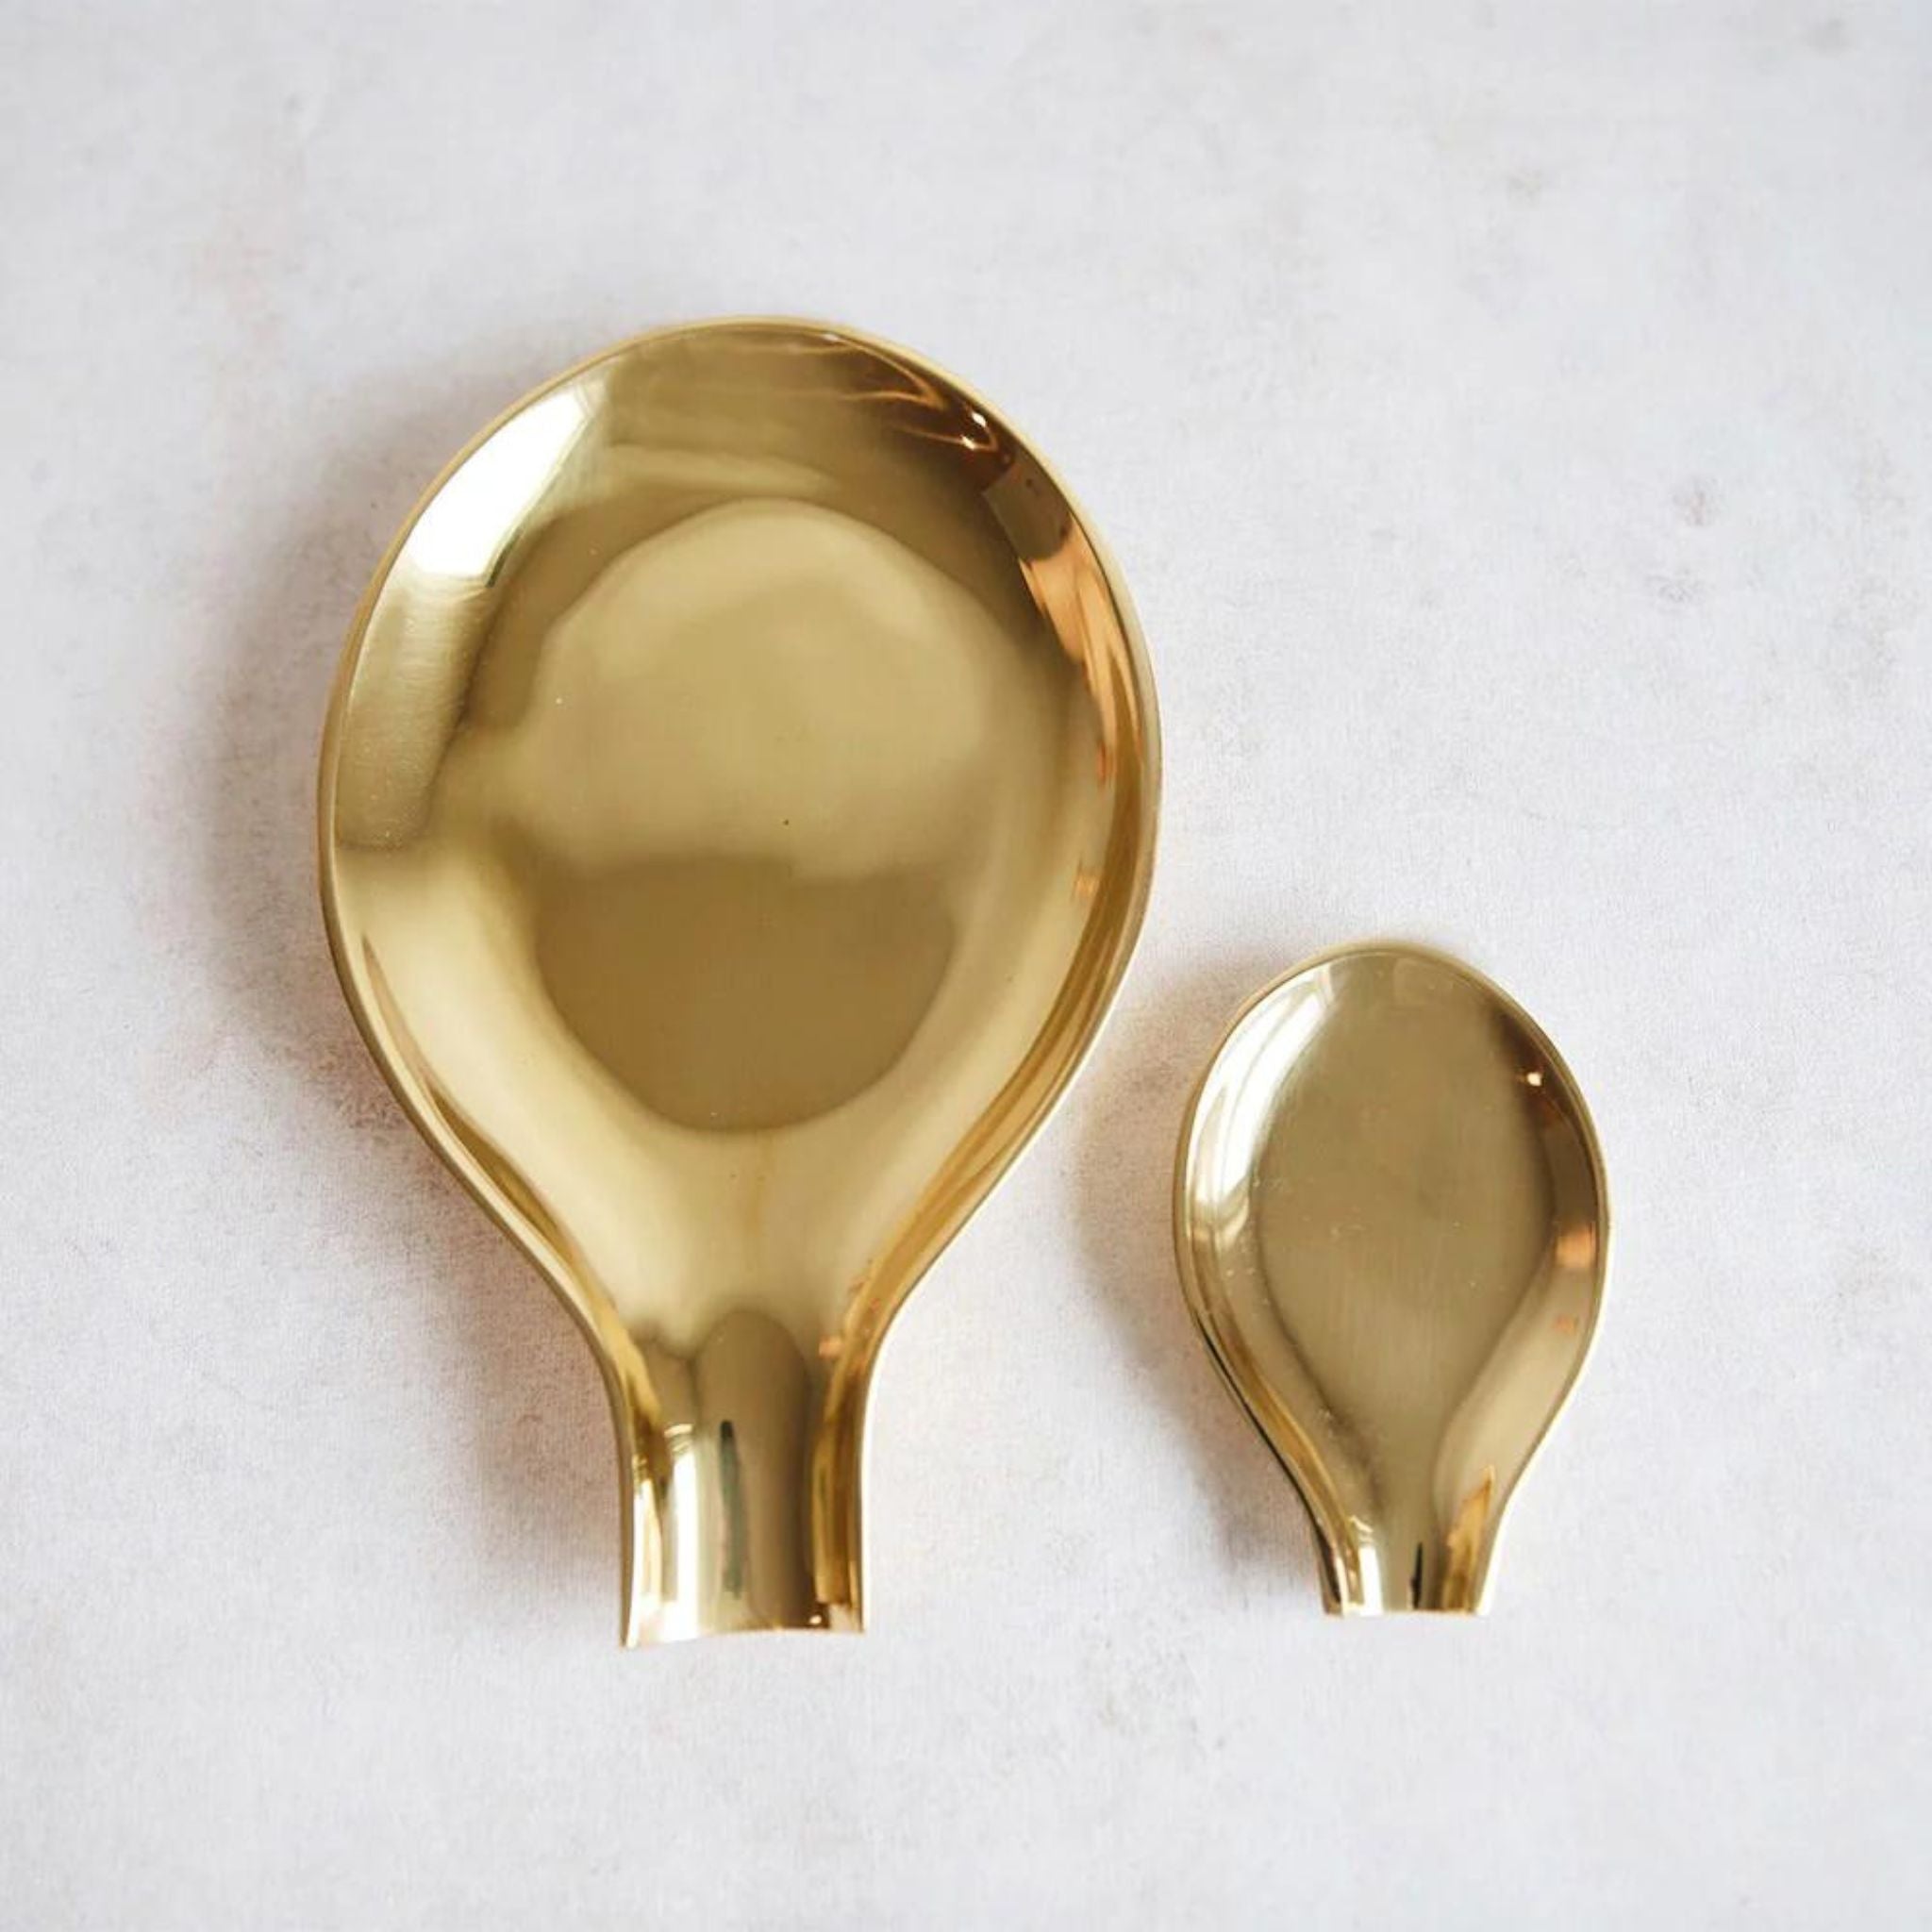 Simply Elevated - Ingenuous yet super simple, this Brass Spoon Rest provides a place to put your spoon when not in use. Perfect for keeping on the counter while cooking, or giving to guests when Serving tea, the Brass Spoon Rest is the perfect accompaniment for any oft-used stove-side utensil.